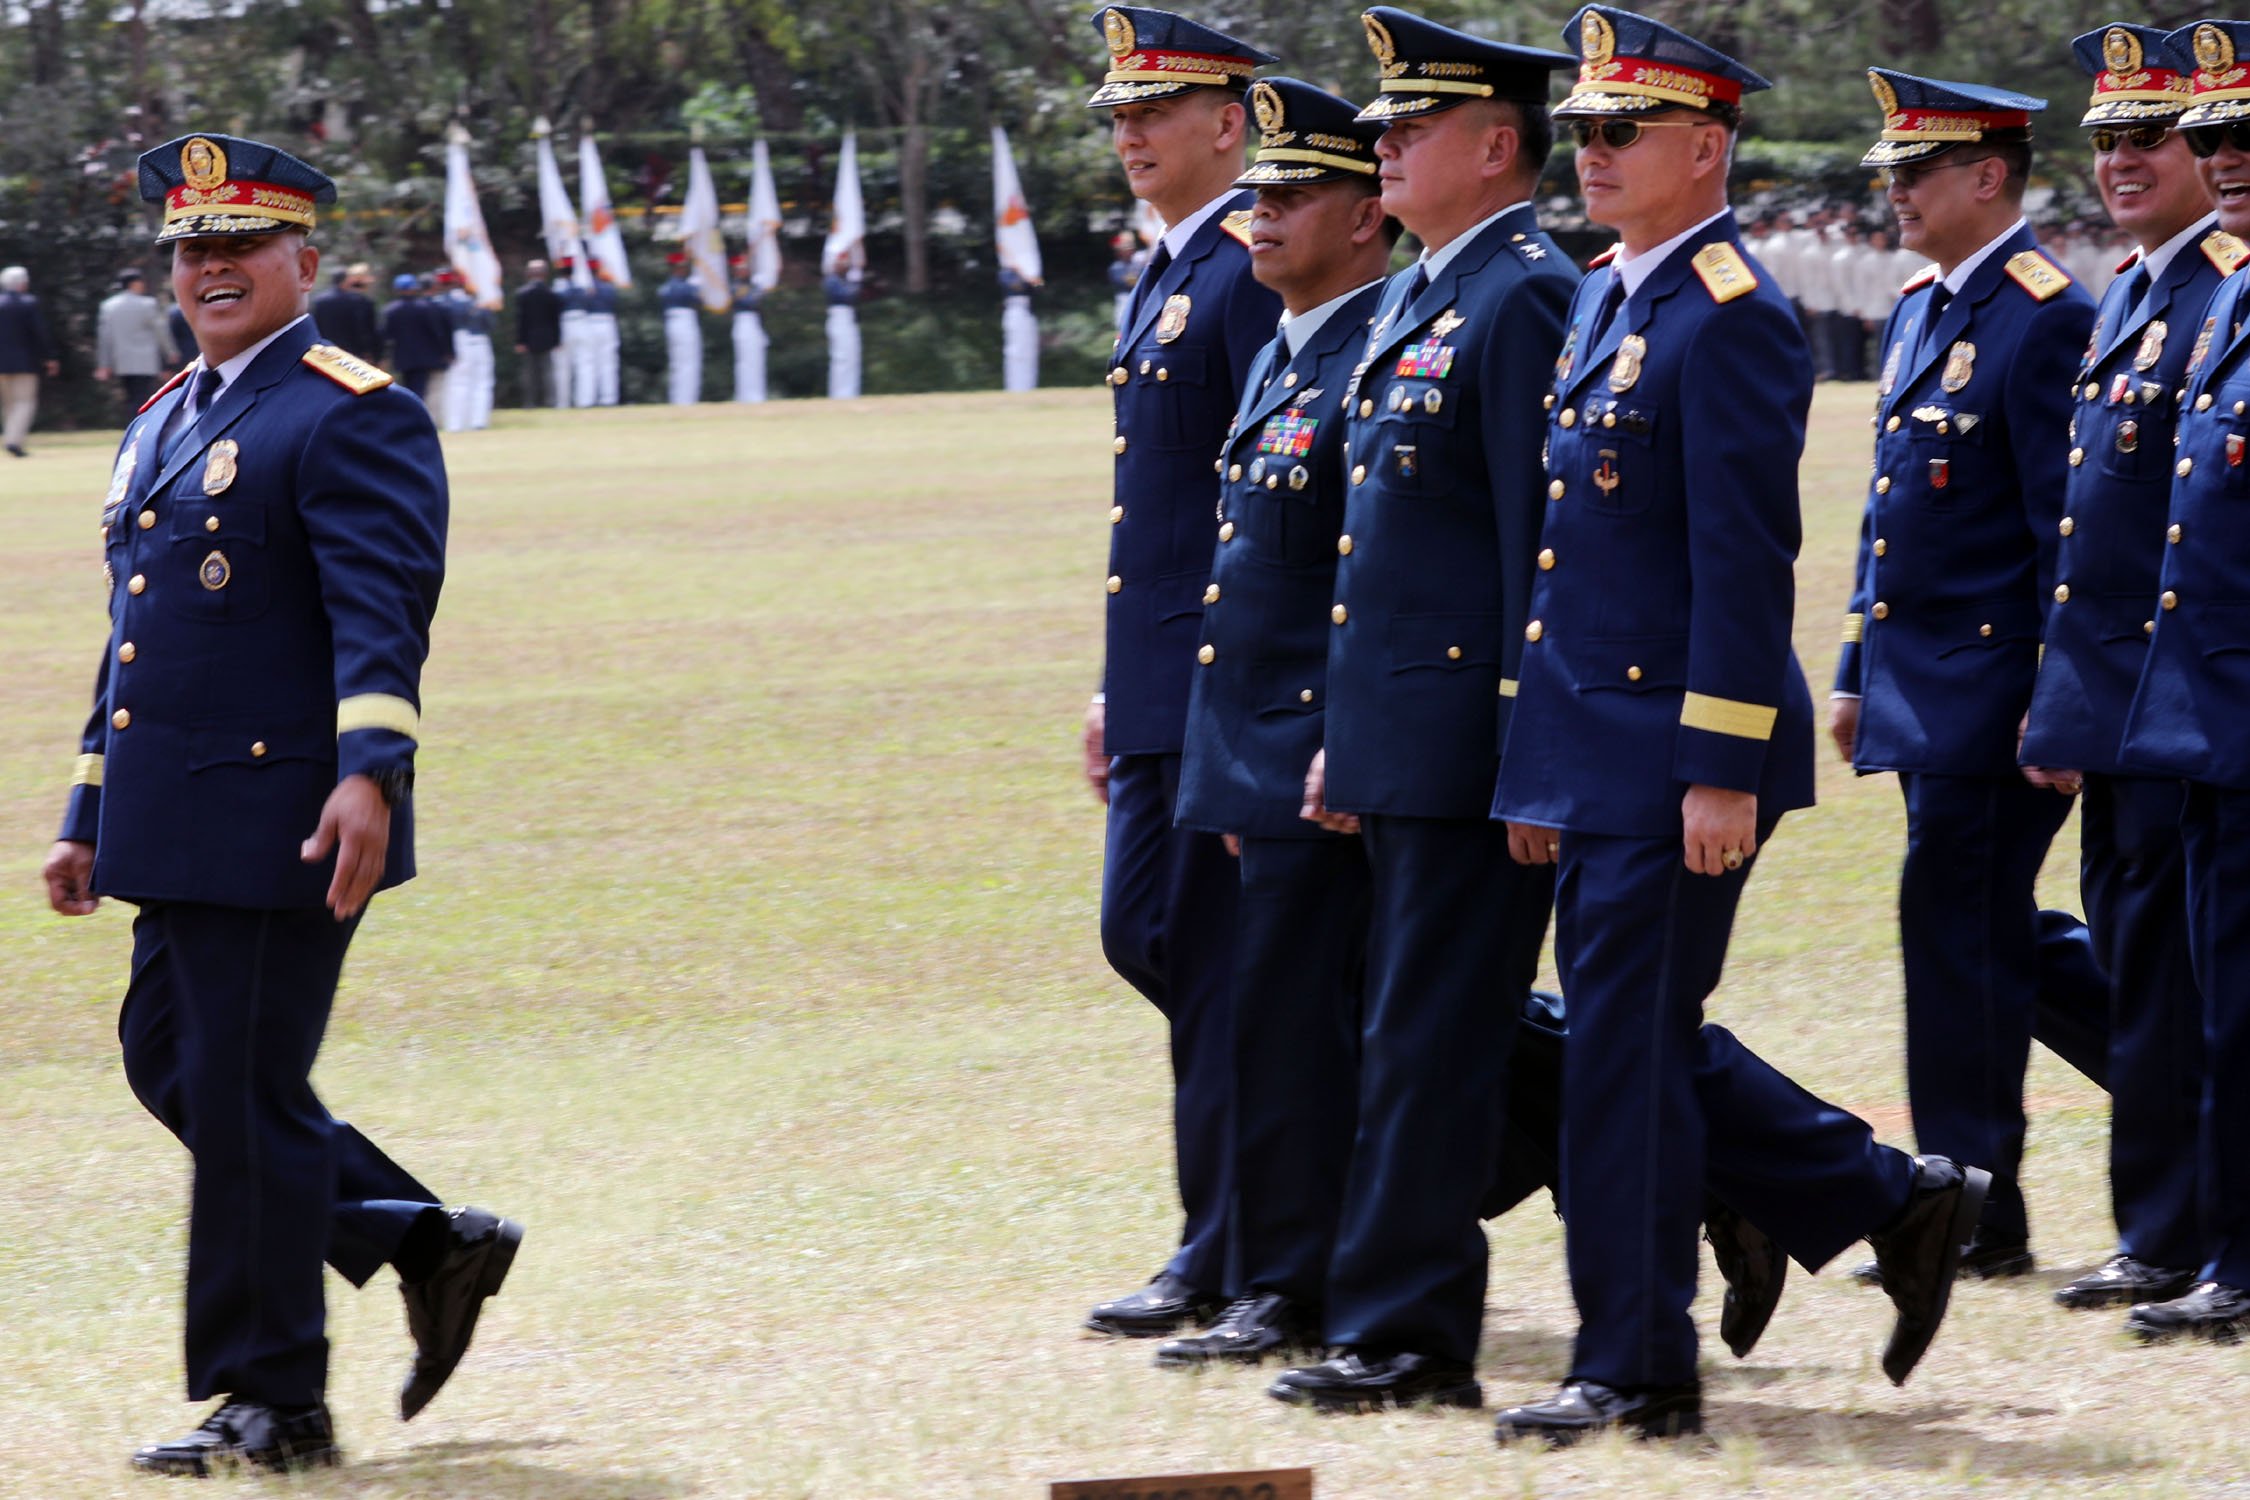 PNP Chief leads “Sinagtala” Class of 1986 parade